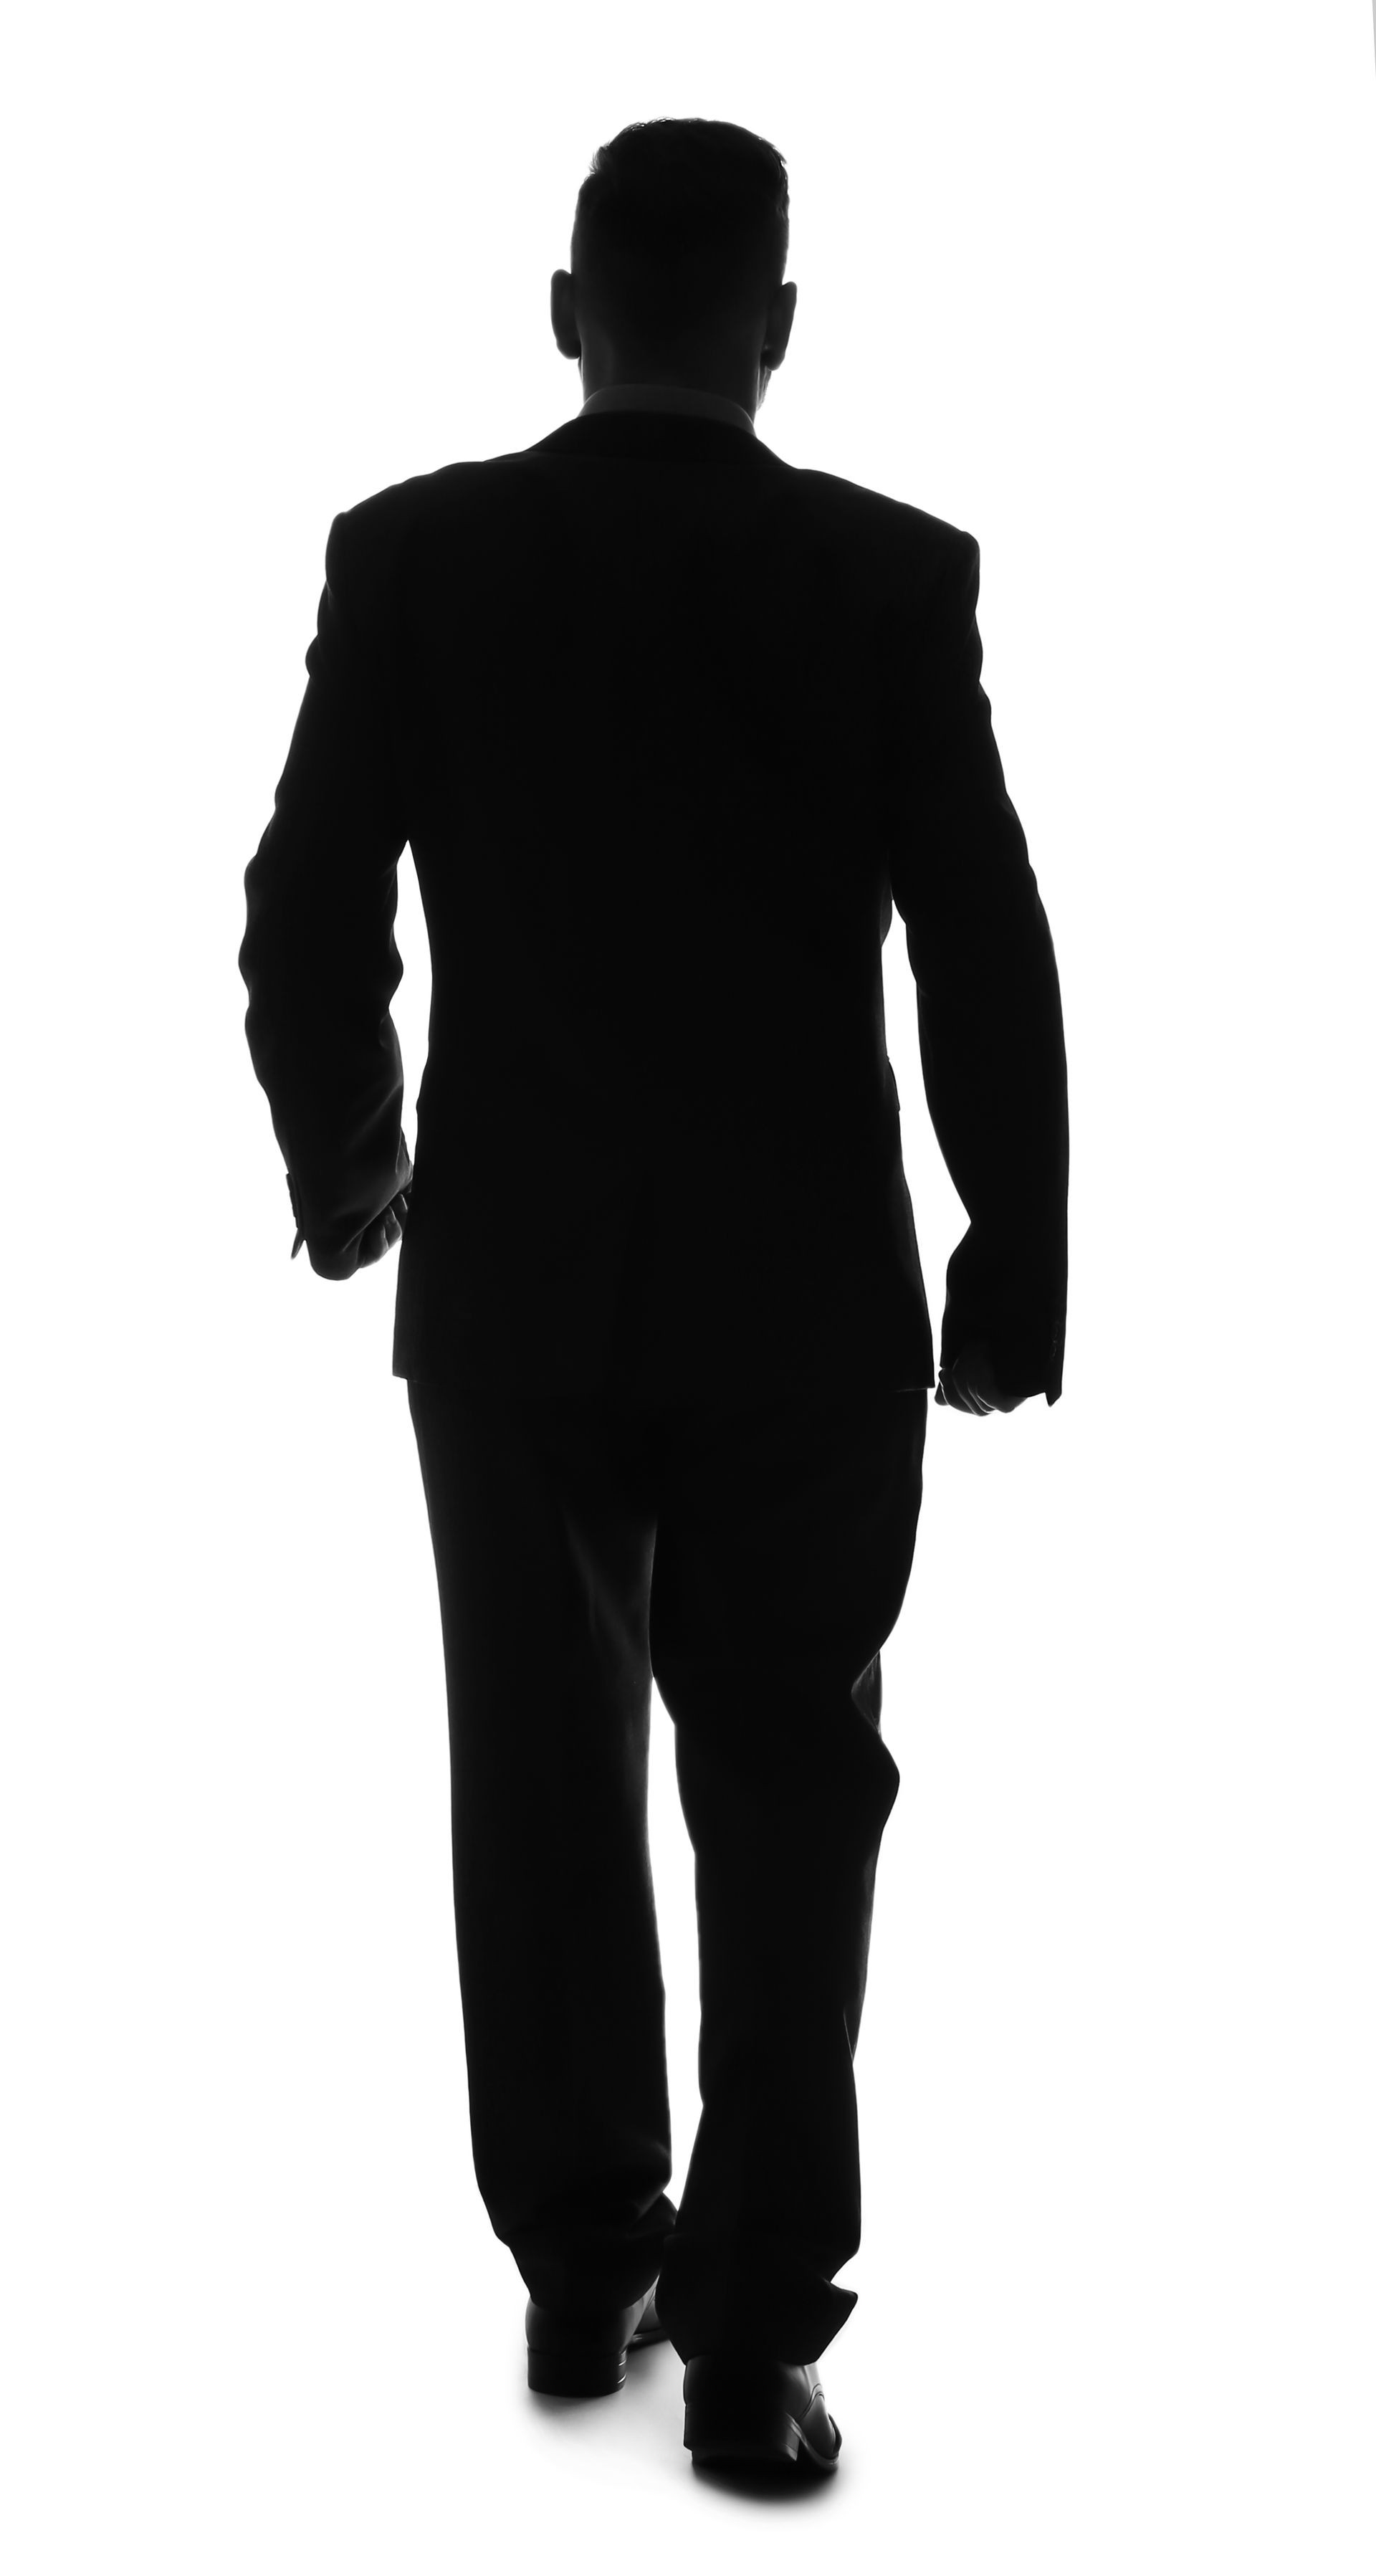 Silhouette of businessman on white background, back view